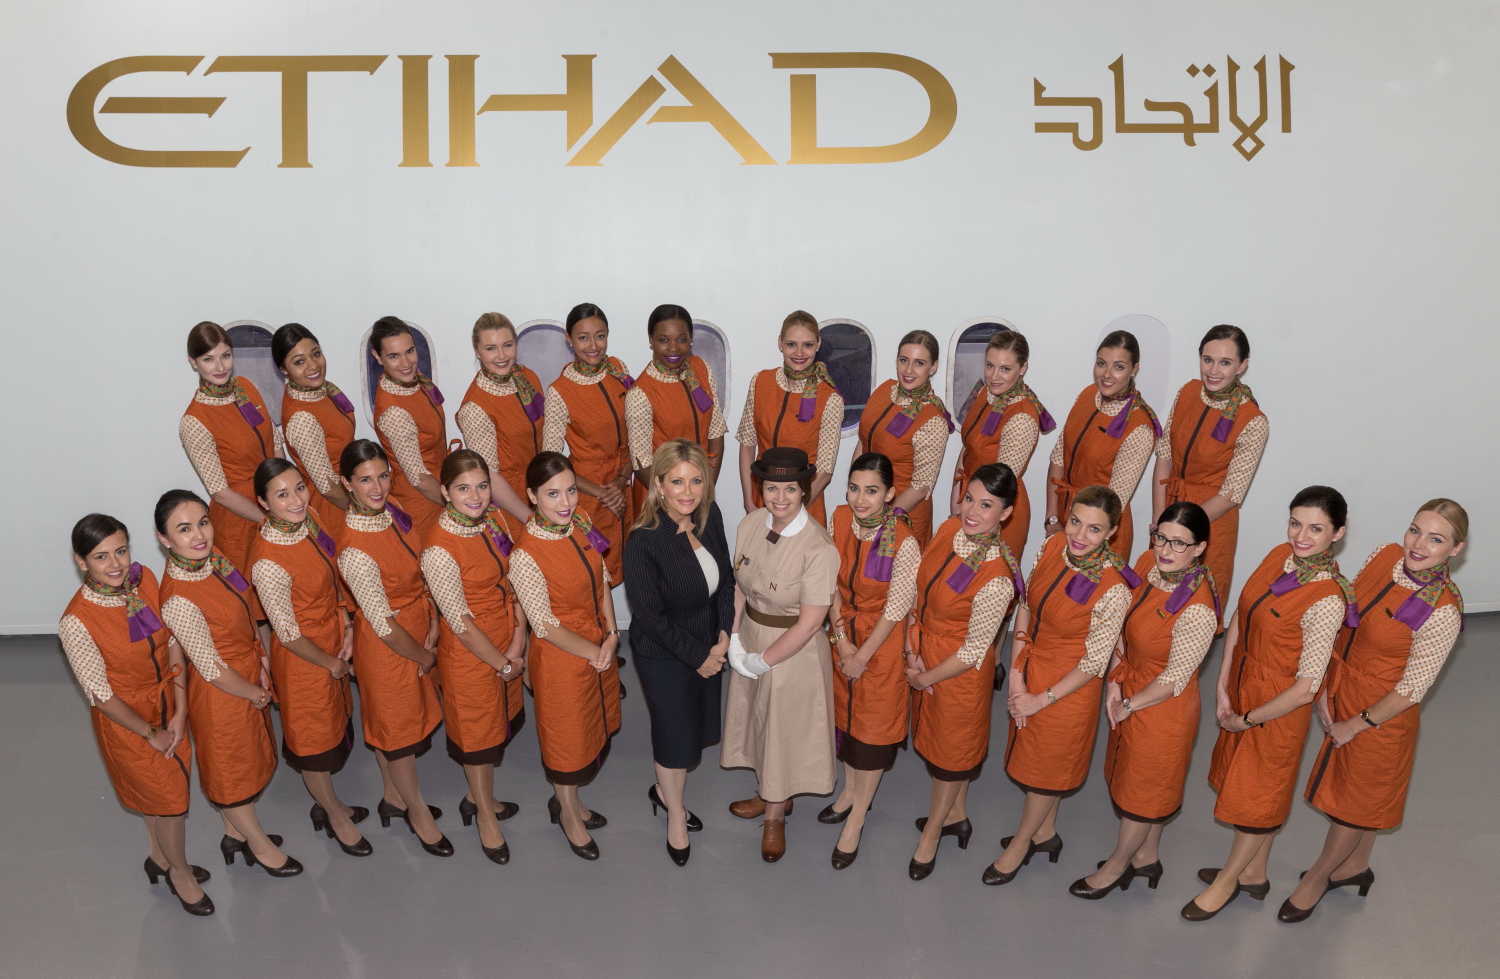 Linda Celestino, Etihad Airways Vice President Guest Experience (left), and Claire Burgess, Head of Research, Consultancy and Training at Norland (right), surrounded by the latest group of graduating Flying Nannies at the Etihad Airways Innovation Training Academy in Abu Dhabi